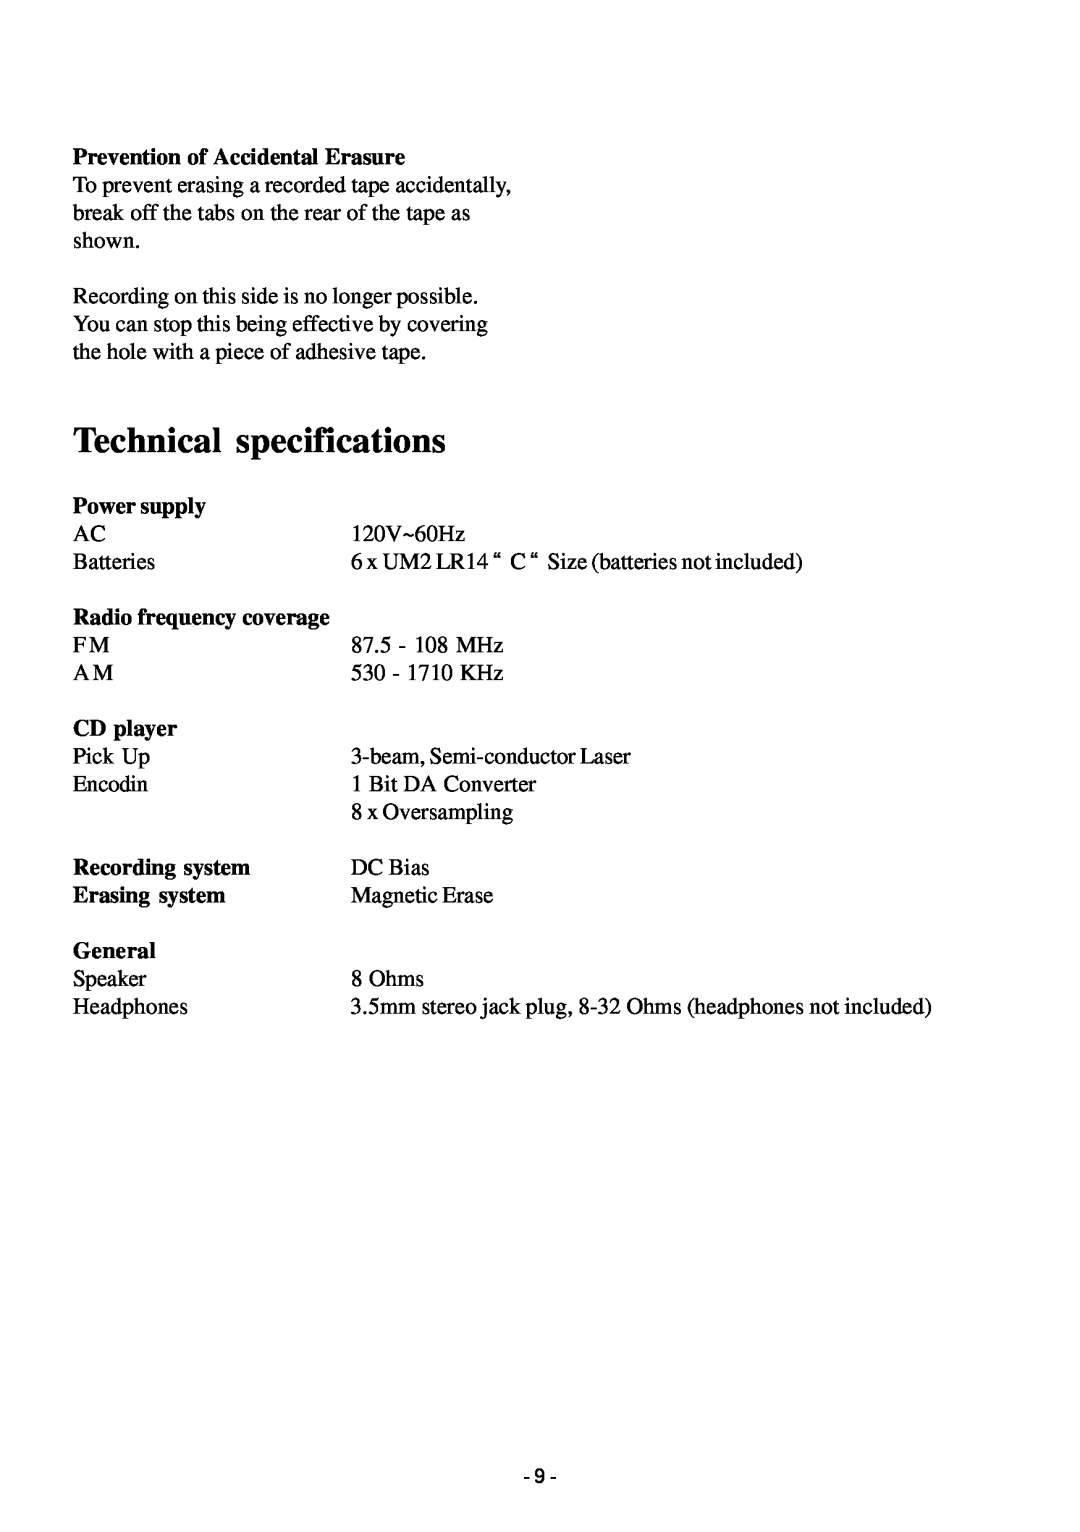 Sylvania SRCD348 manual Technical specifications, Prevention of Accidental Erasure, Power supply, Radio frequency coverage 